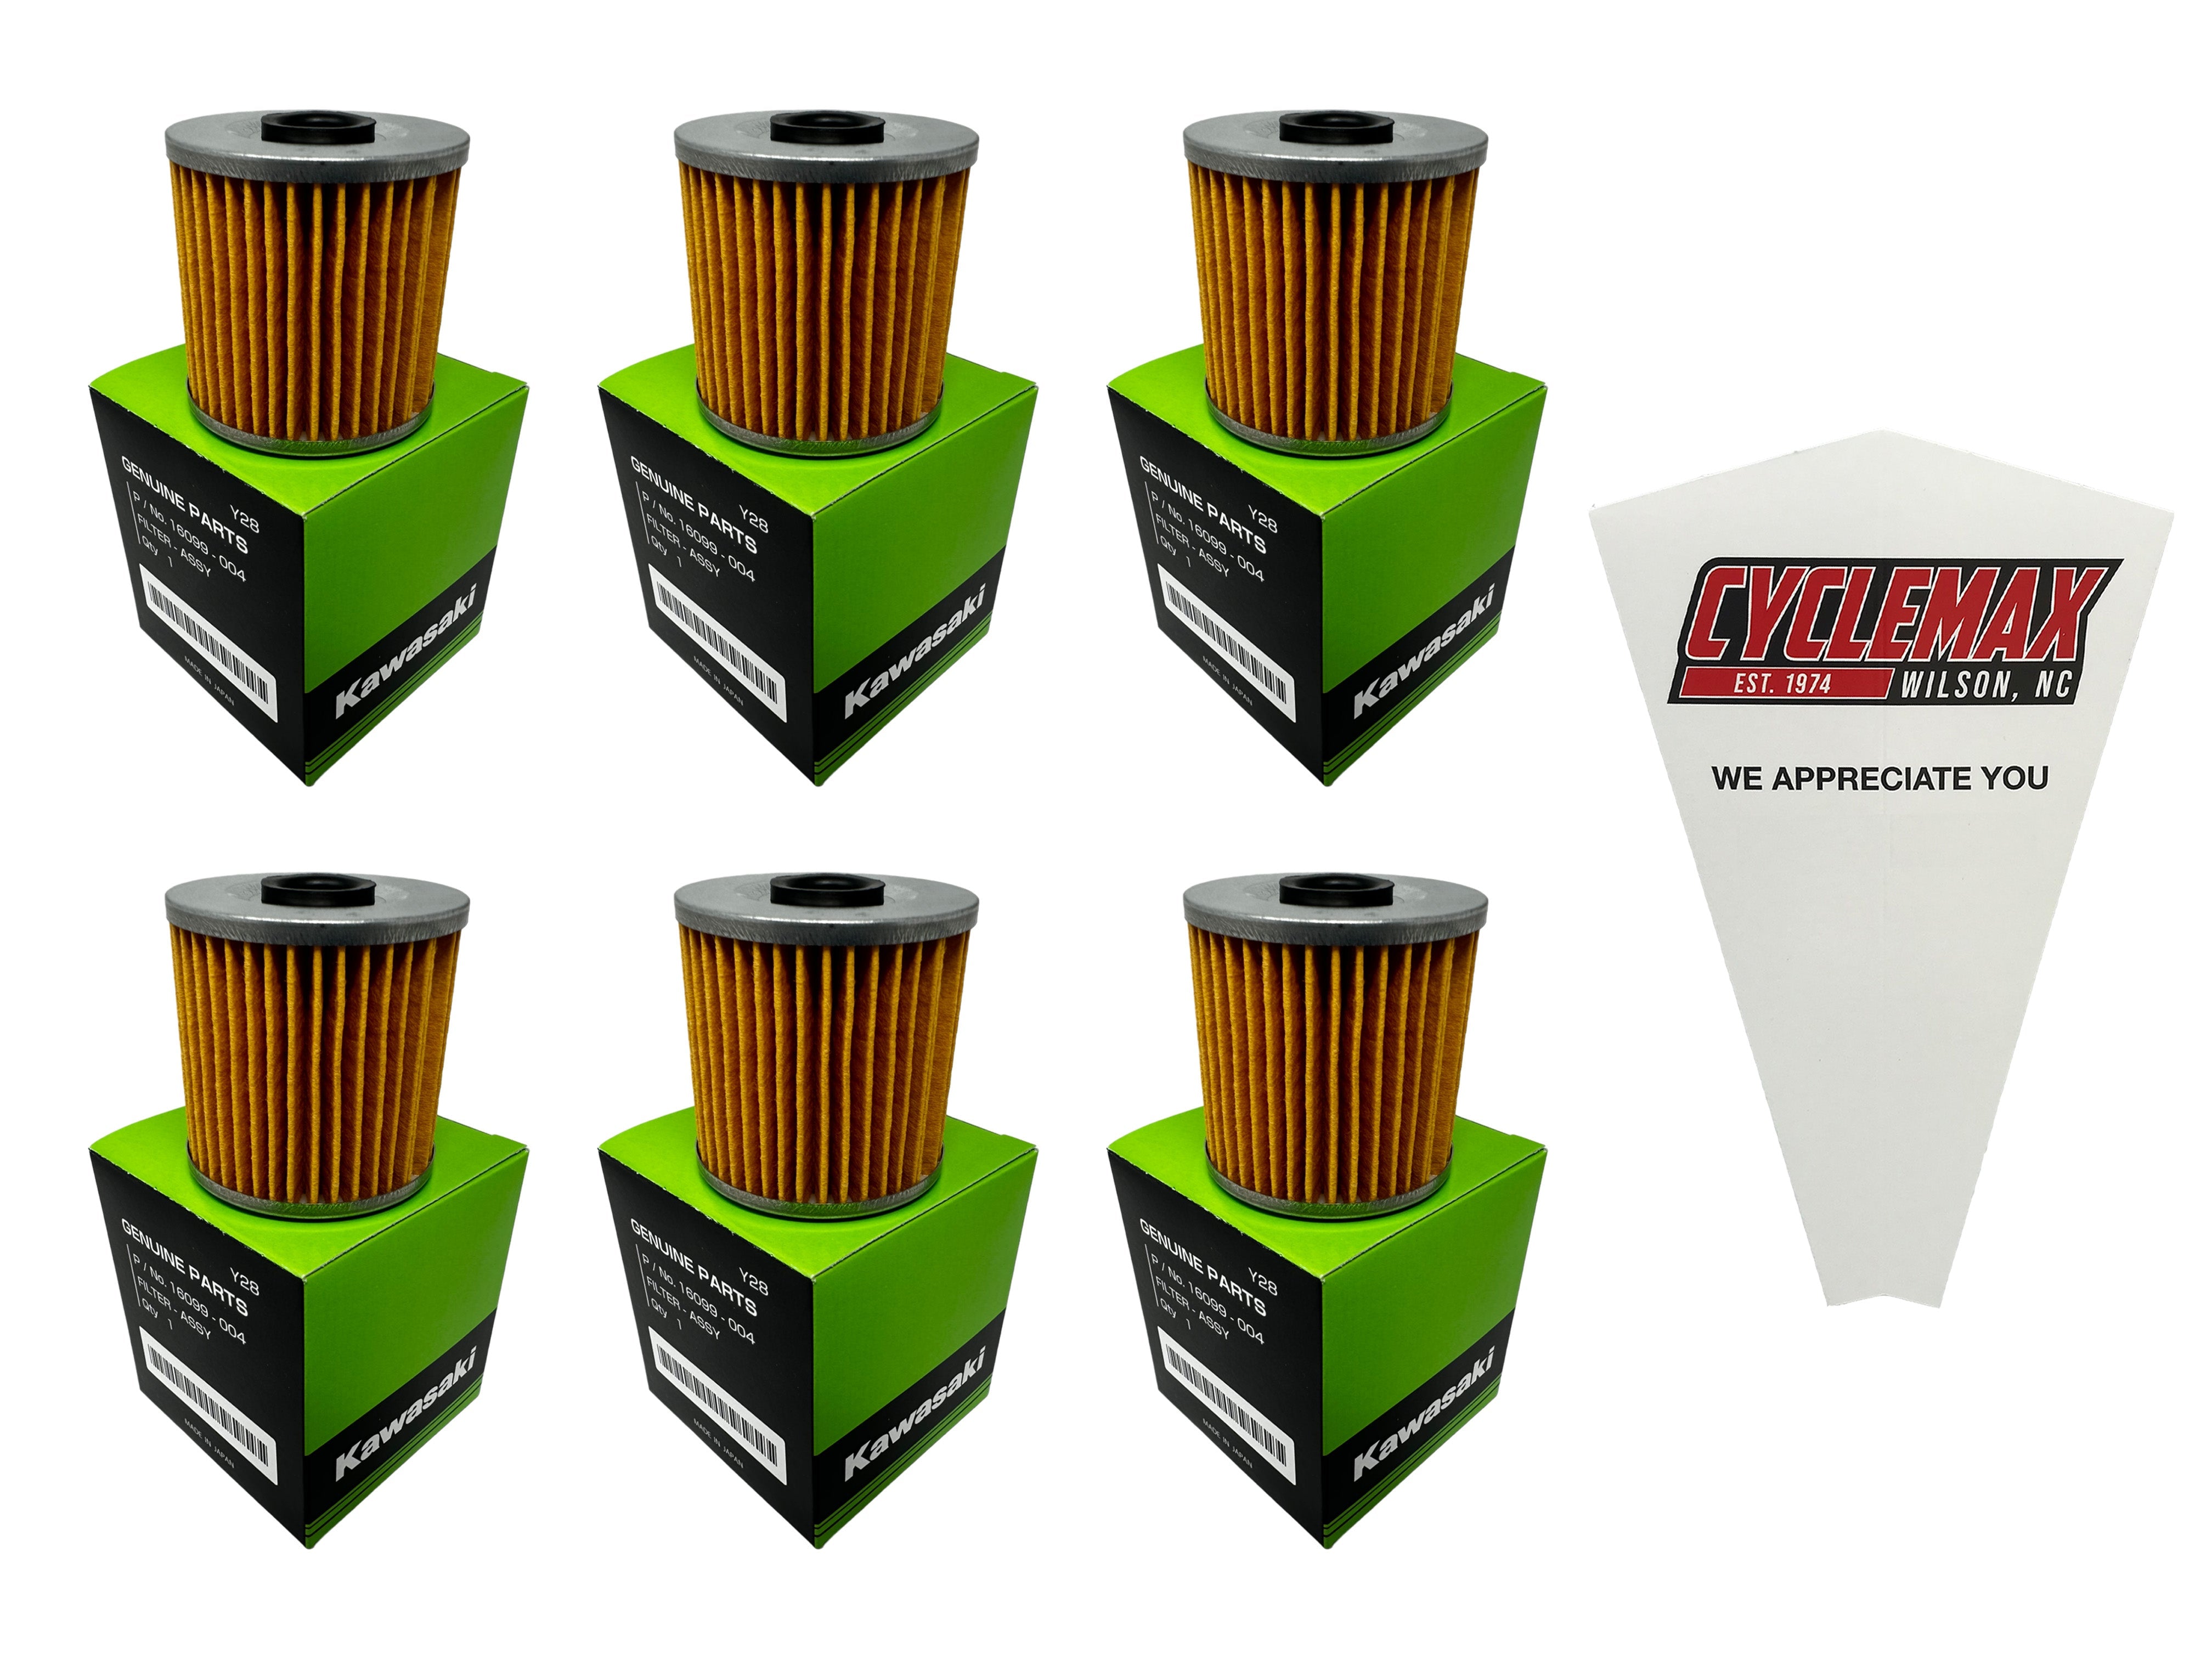 Cyclemax Six Pack for Kawasaki Oil Filter 16099-004 Contains Six Filters and a Funnel